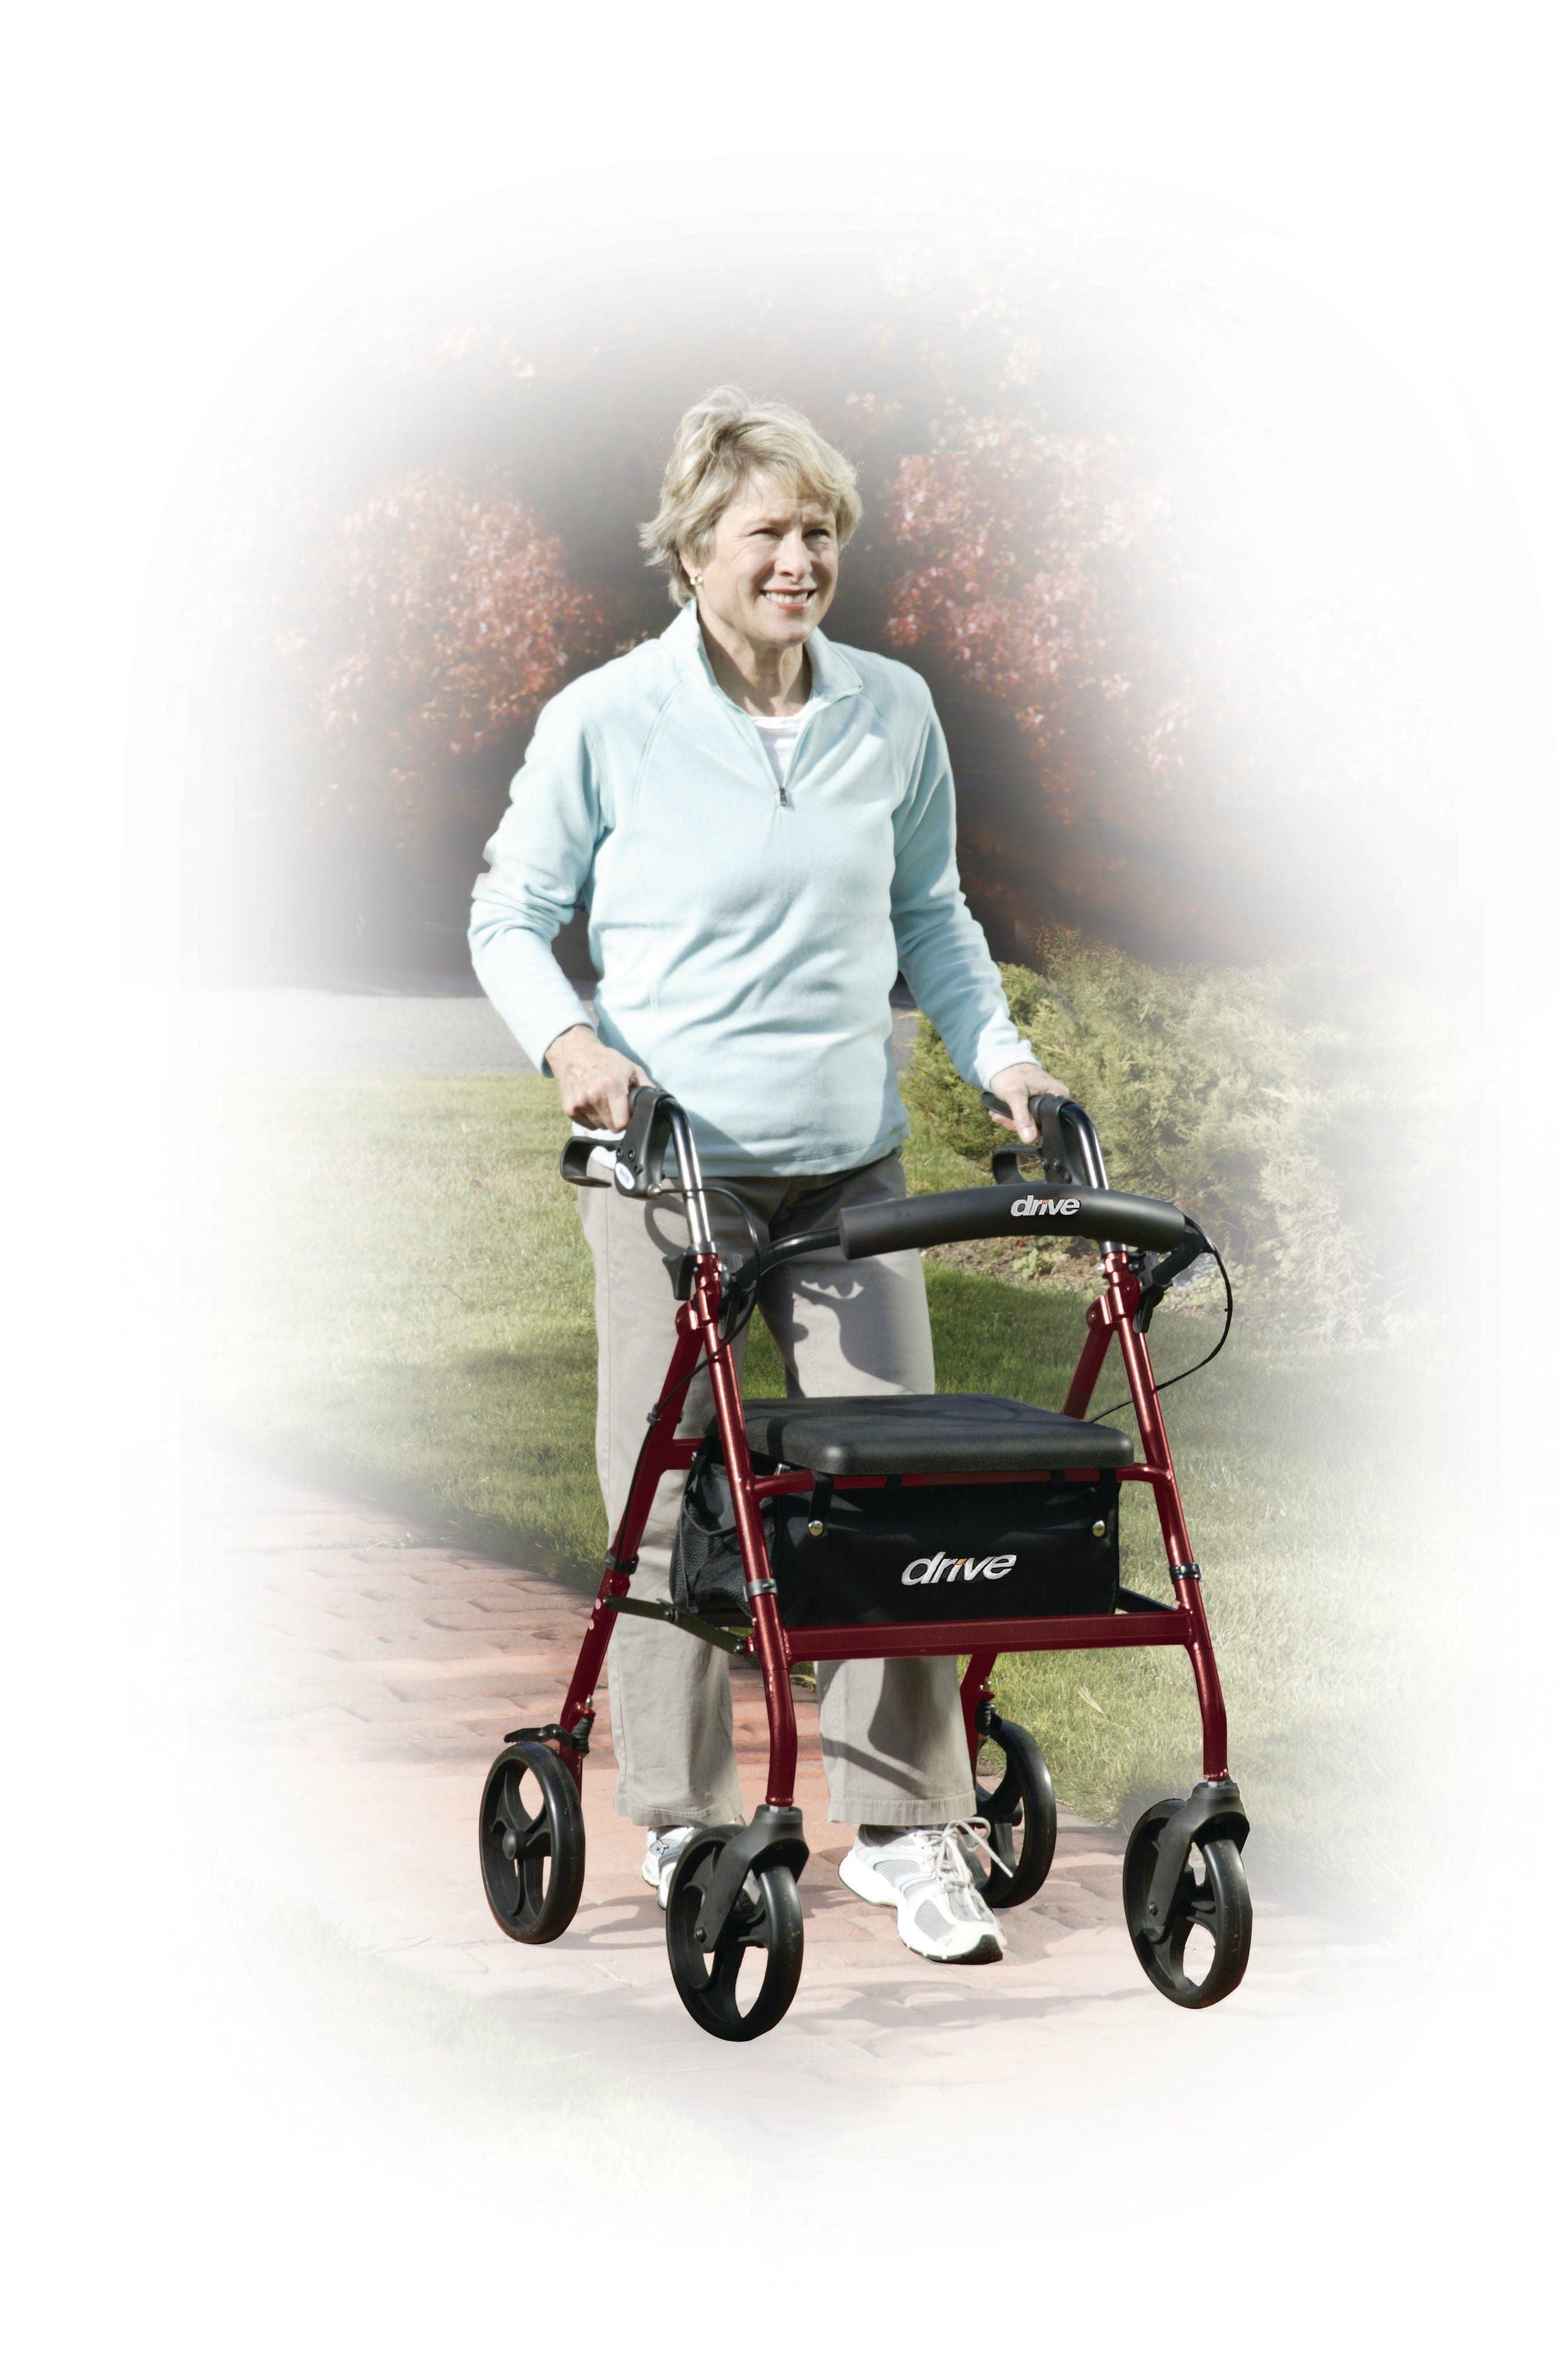 Drive Medical Drive Medical Rollator Rolling Walker with 6" Wheels, Fold Up Removable Back Support and Padded Seat